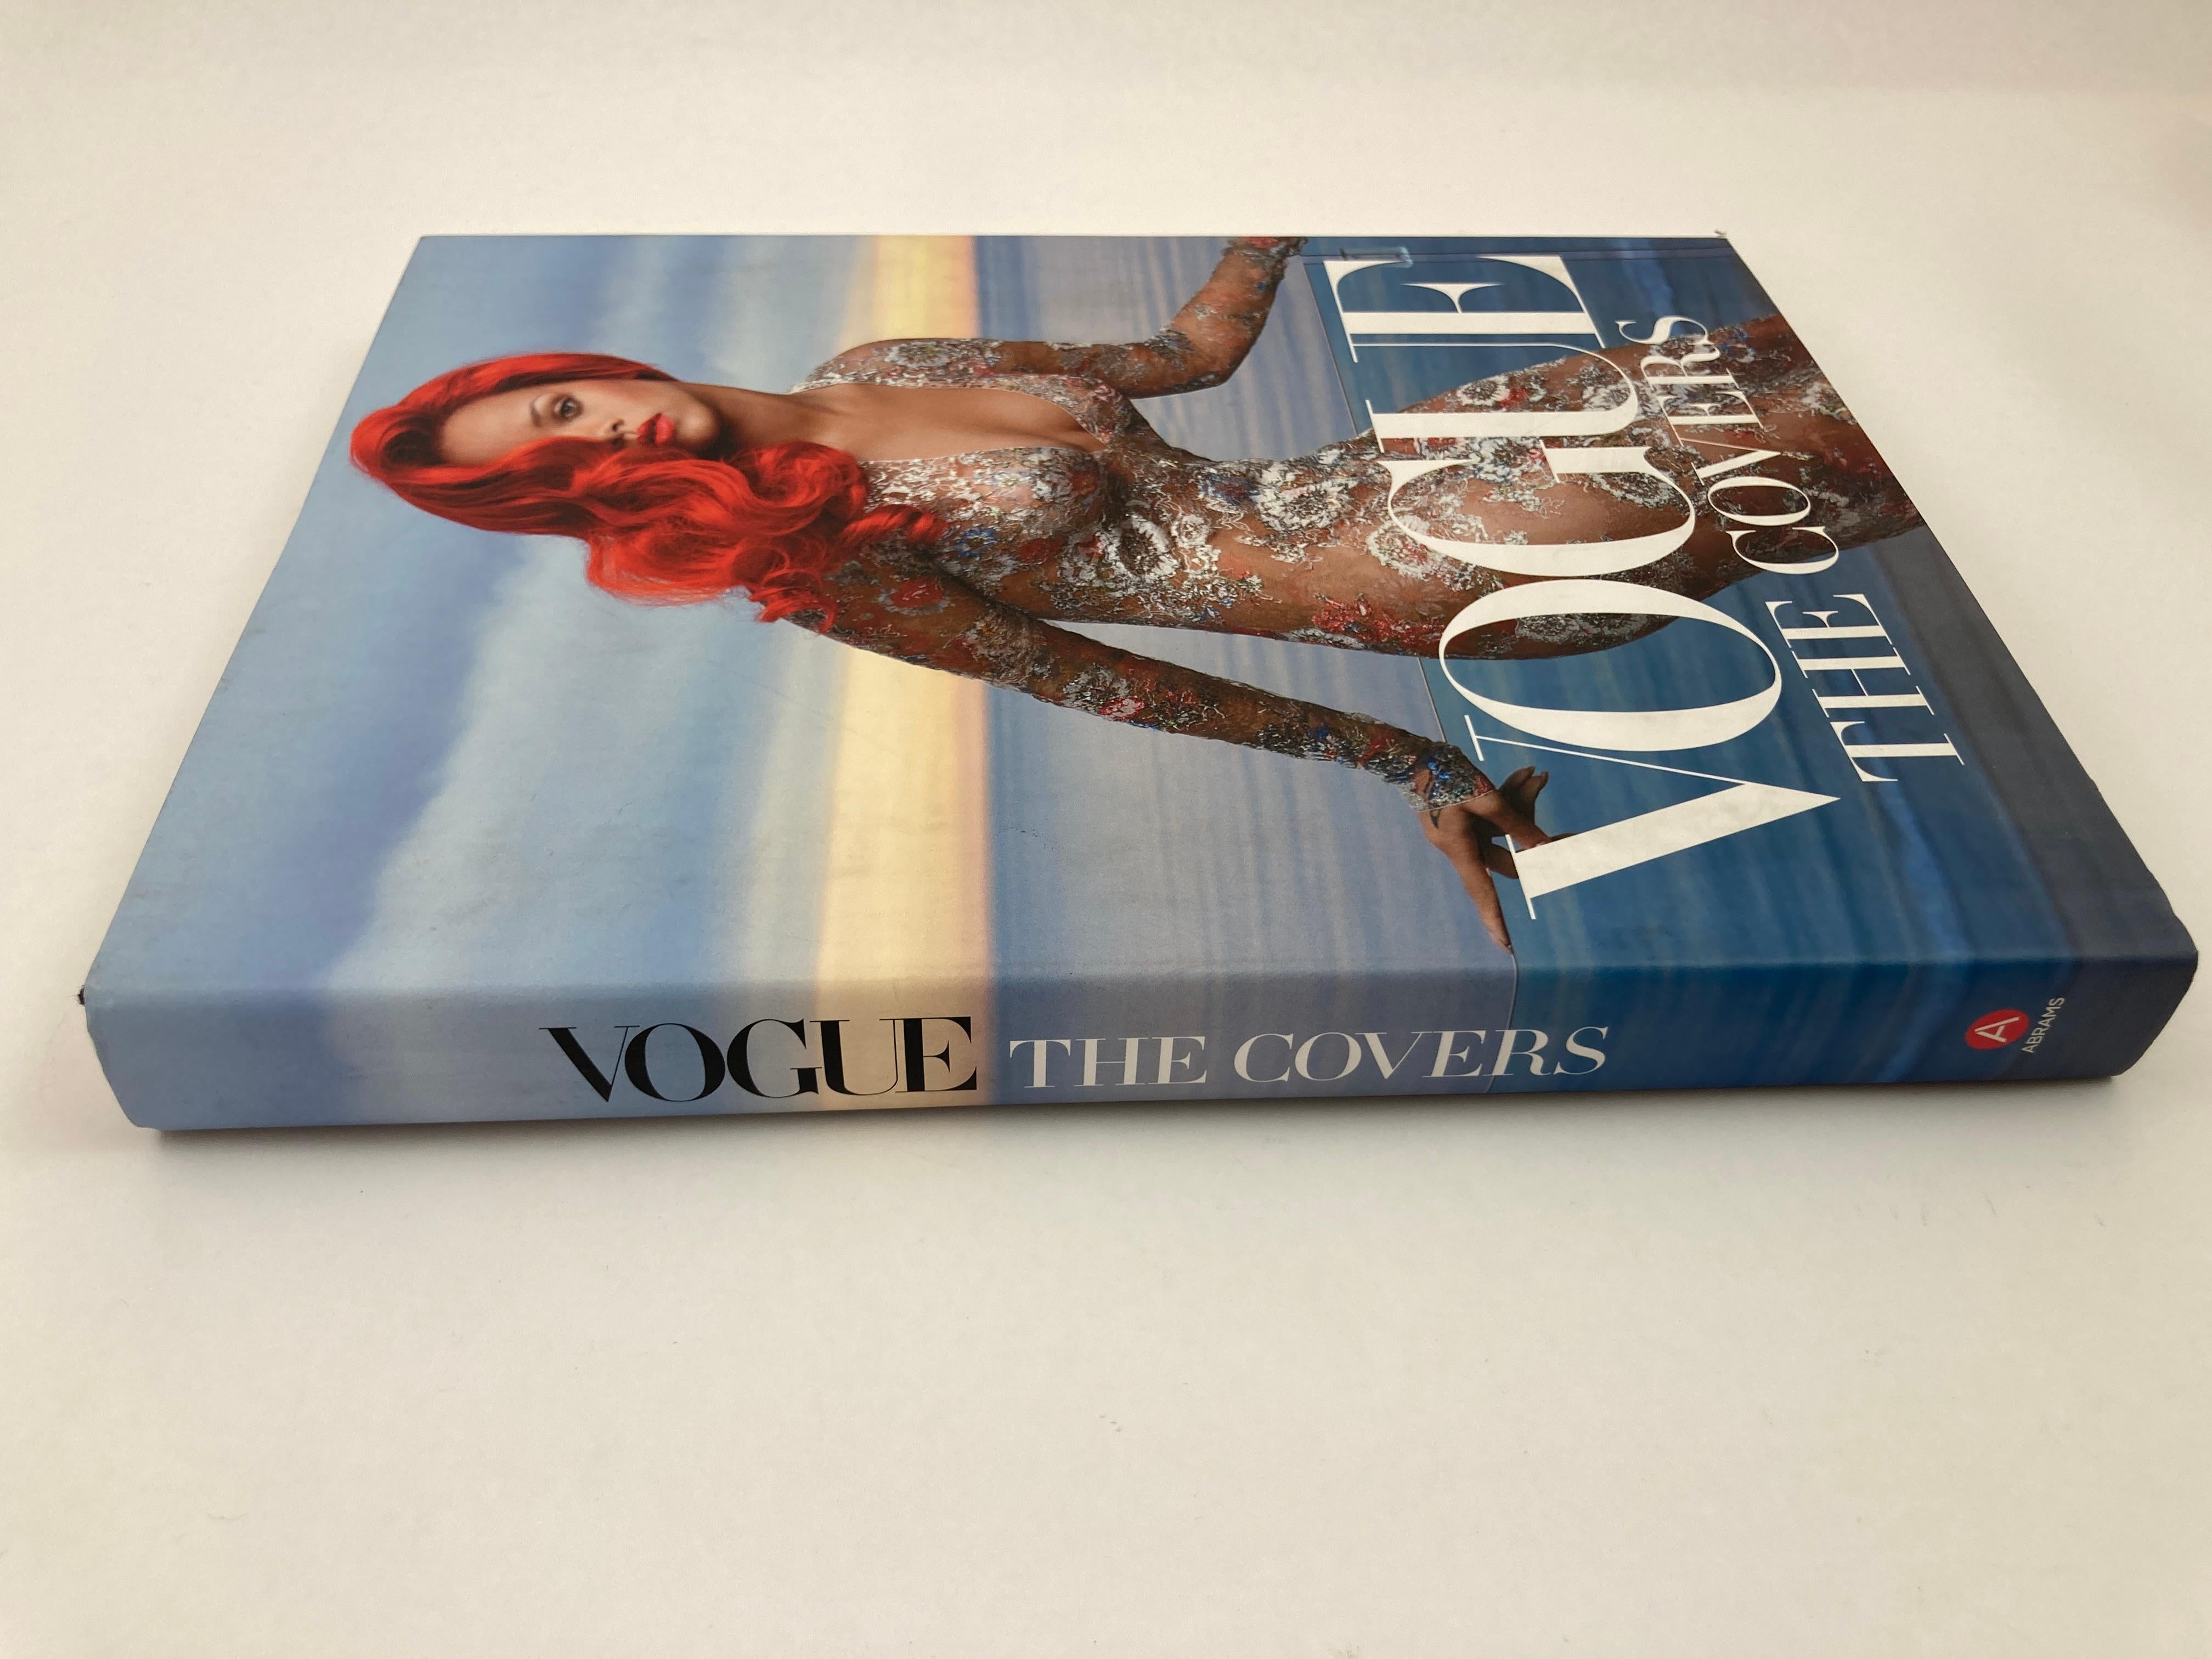 Vogue The Covers Hardcover Coffee Table Book.
From Gallery Met founder and author Dodie Kazanjian, this stunning updated edition of Vogue: The Covers continues to pay tribute to its tradition of beauty and excellence with a compilation of even more